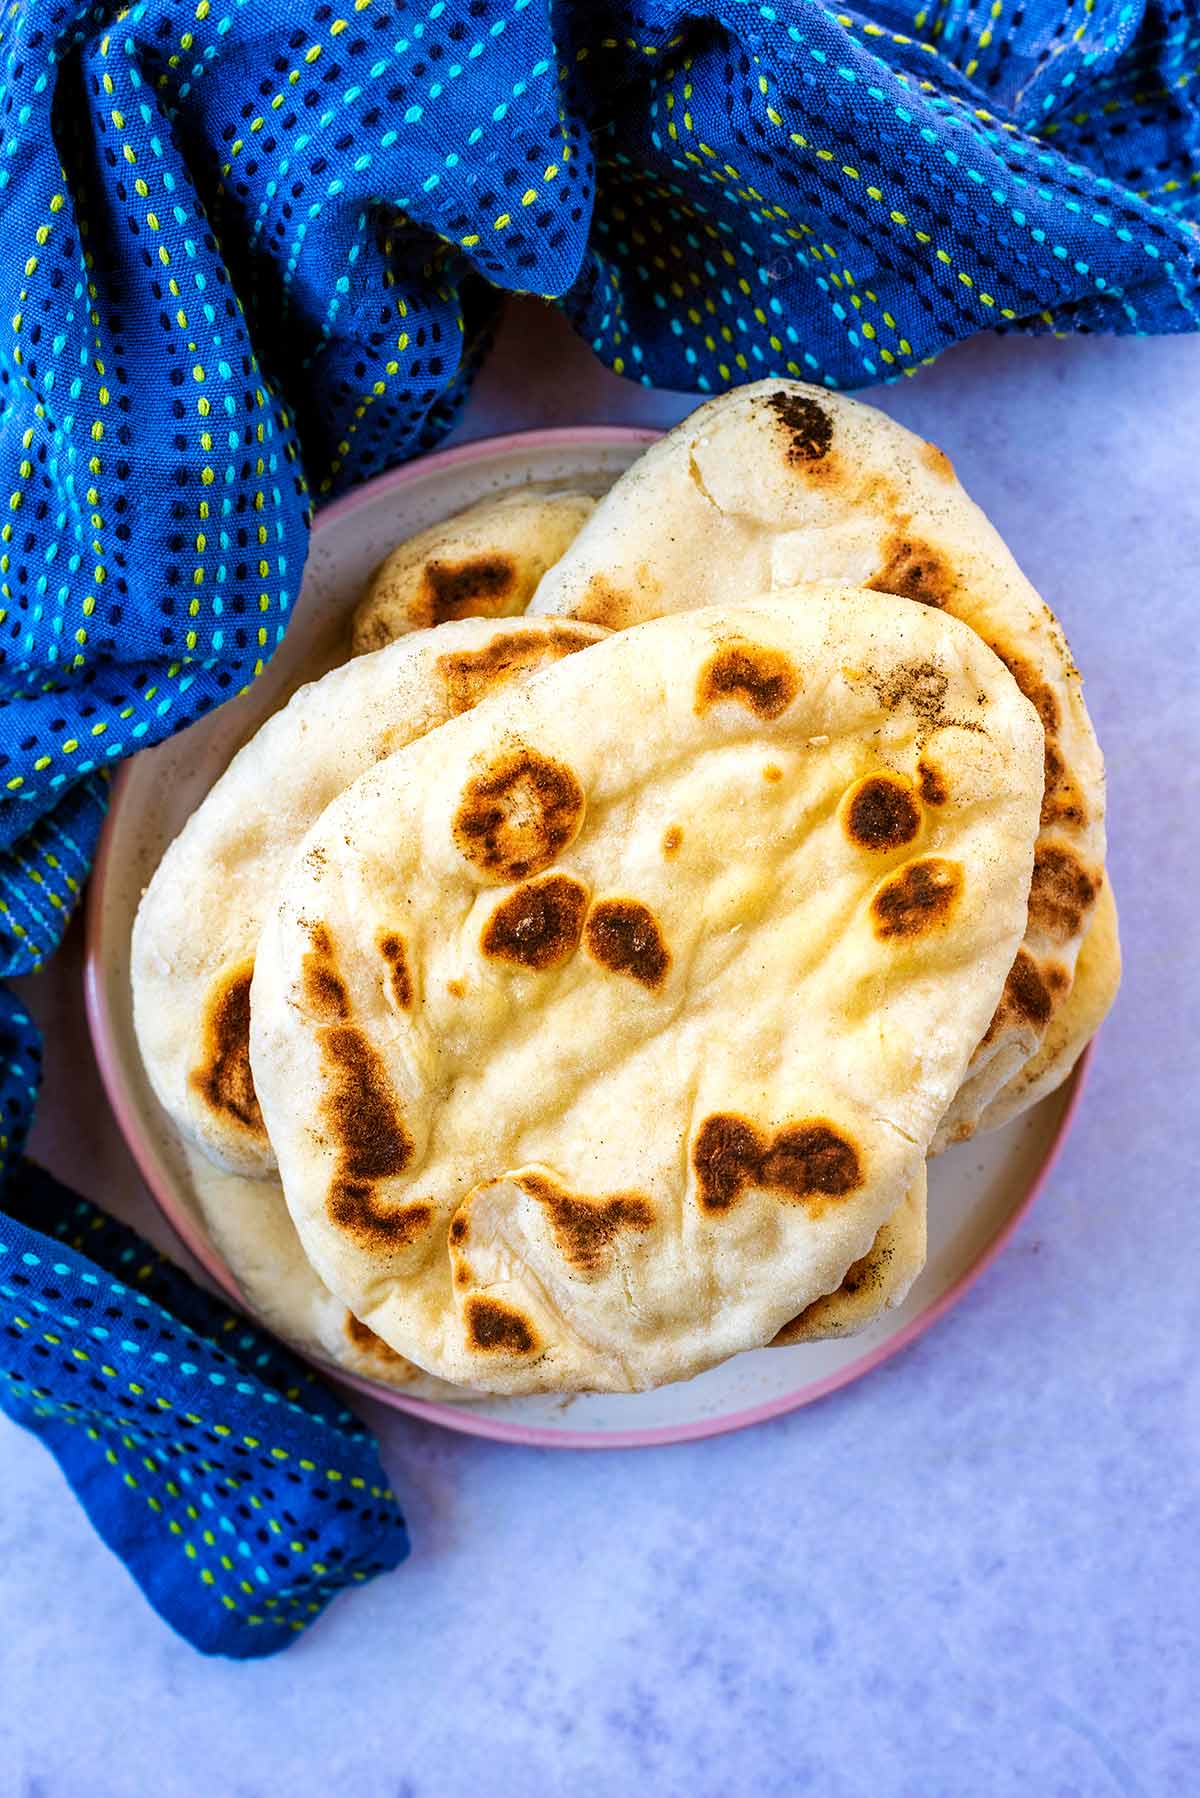 A stack of naan breads next to a blue towel.